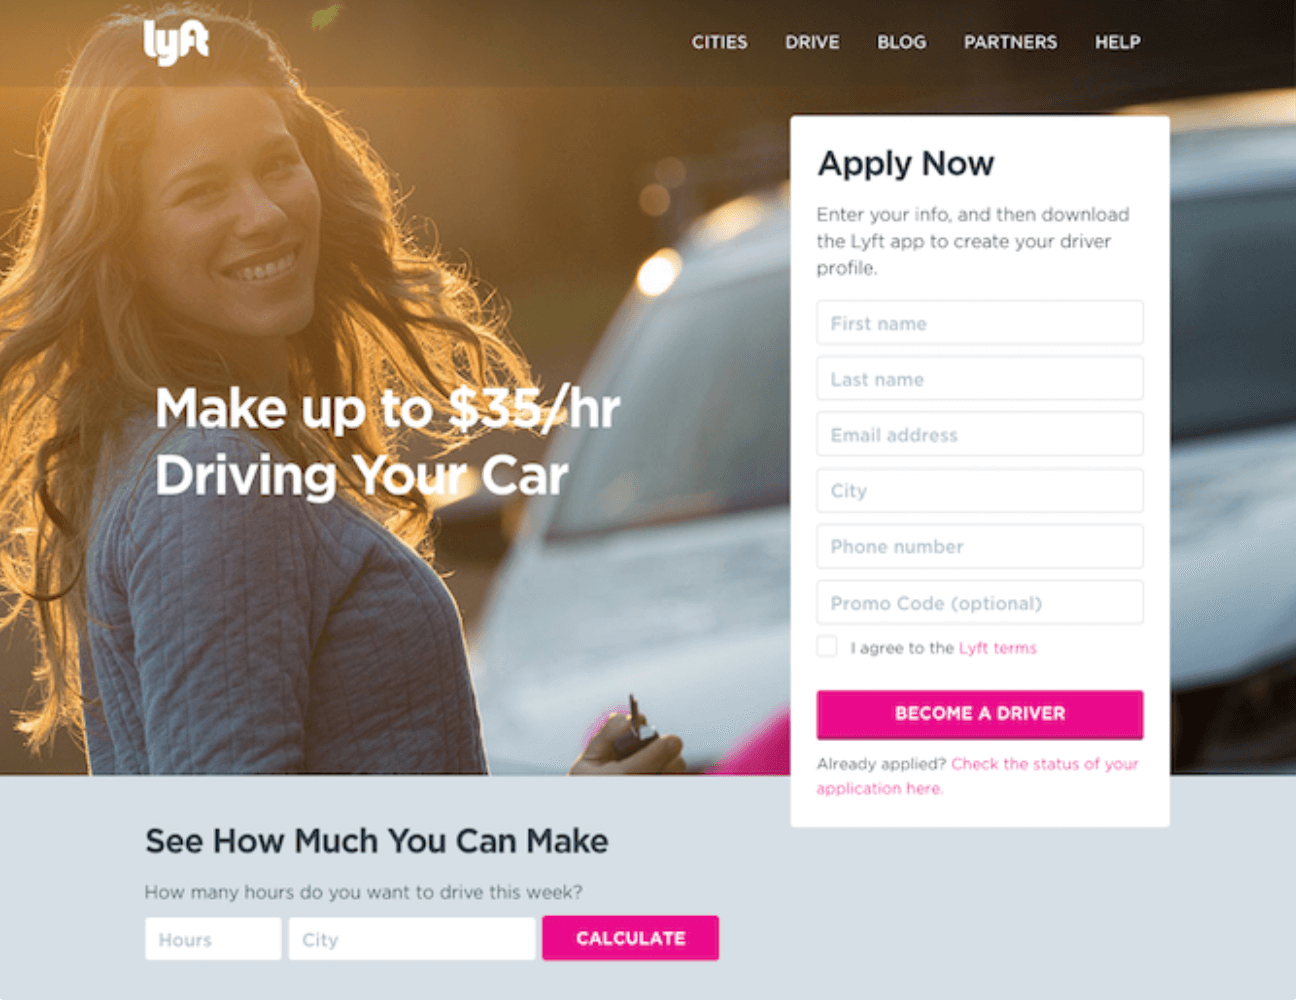 A driver sign up landing page for Lyft